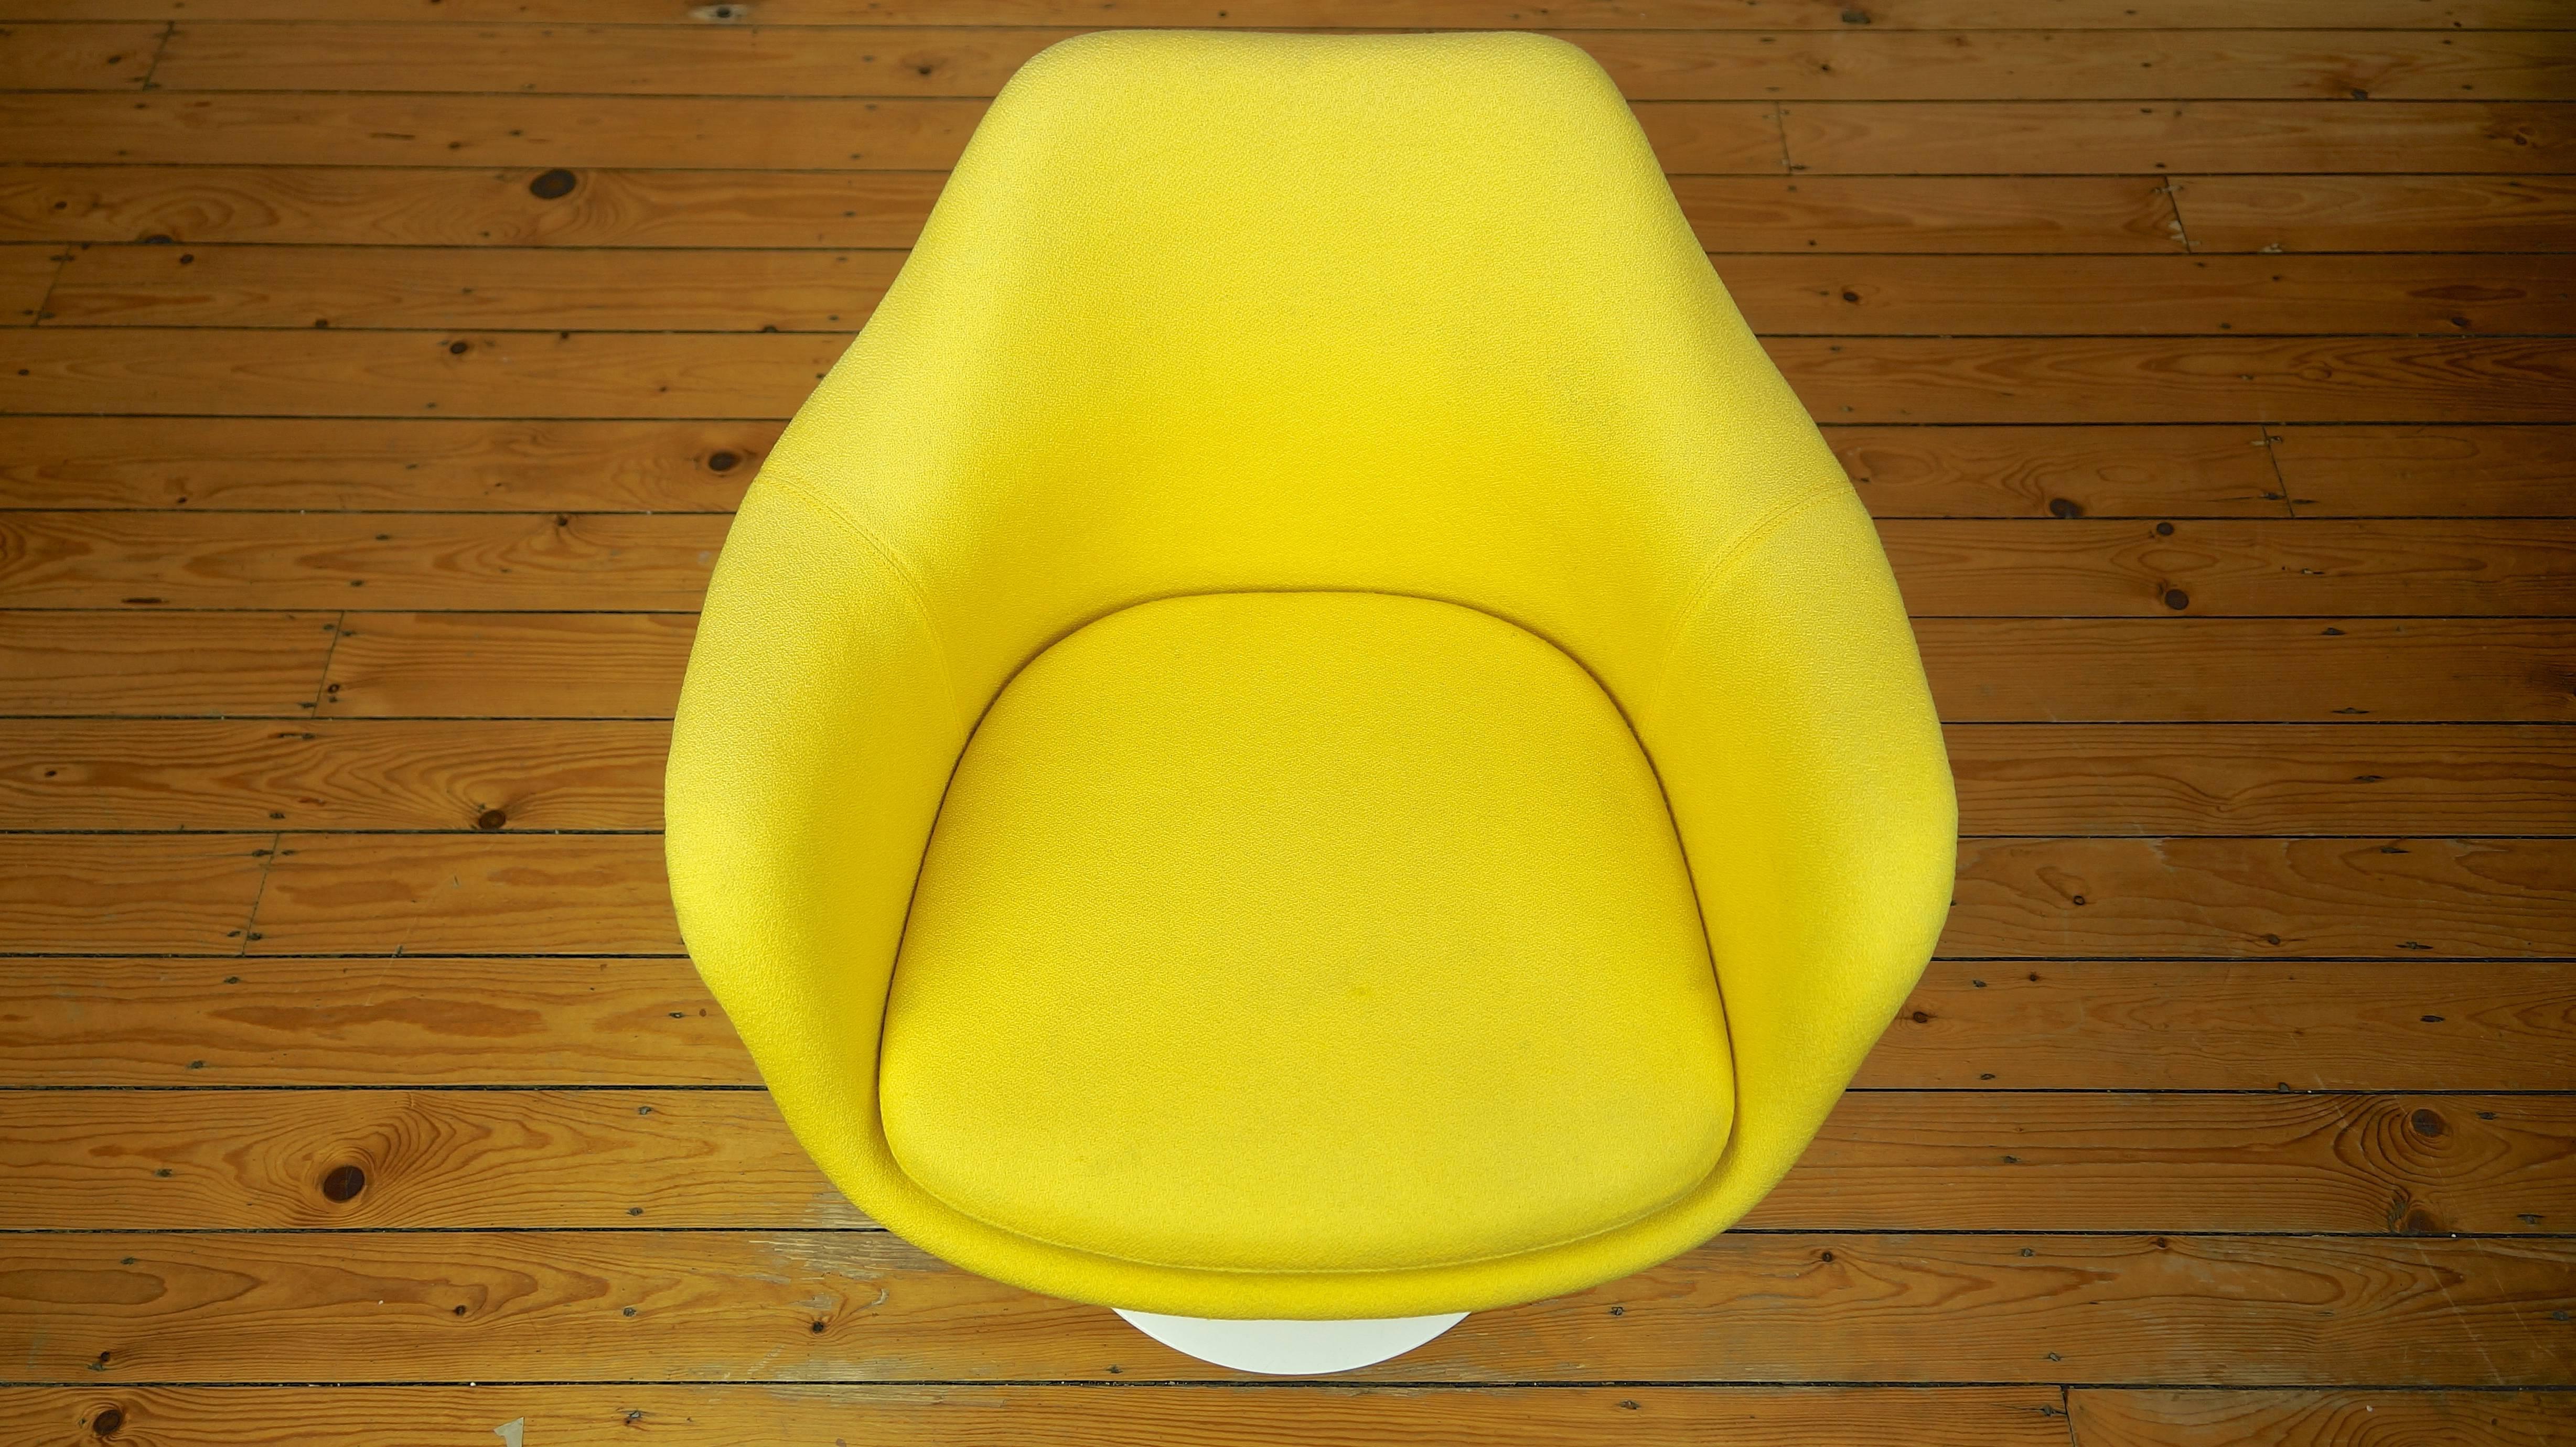 19th Century Vintage Tulip Chair or Armchair by Eero Saarinen for Knoll, Yellow Upholstery